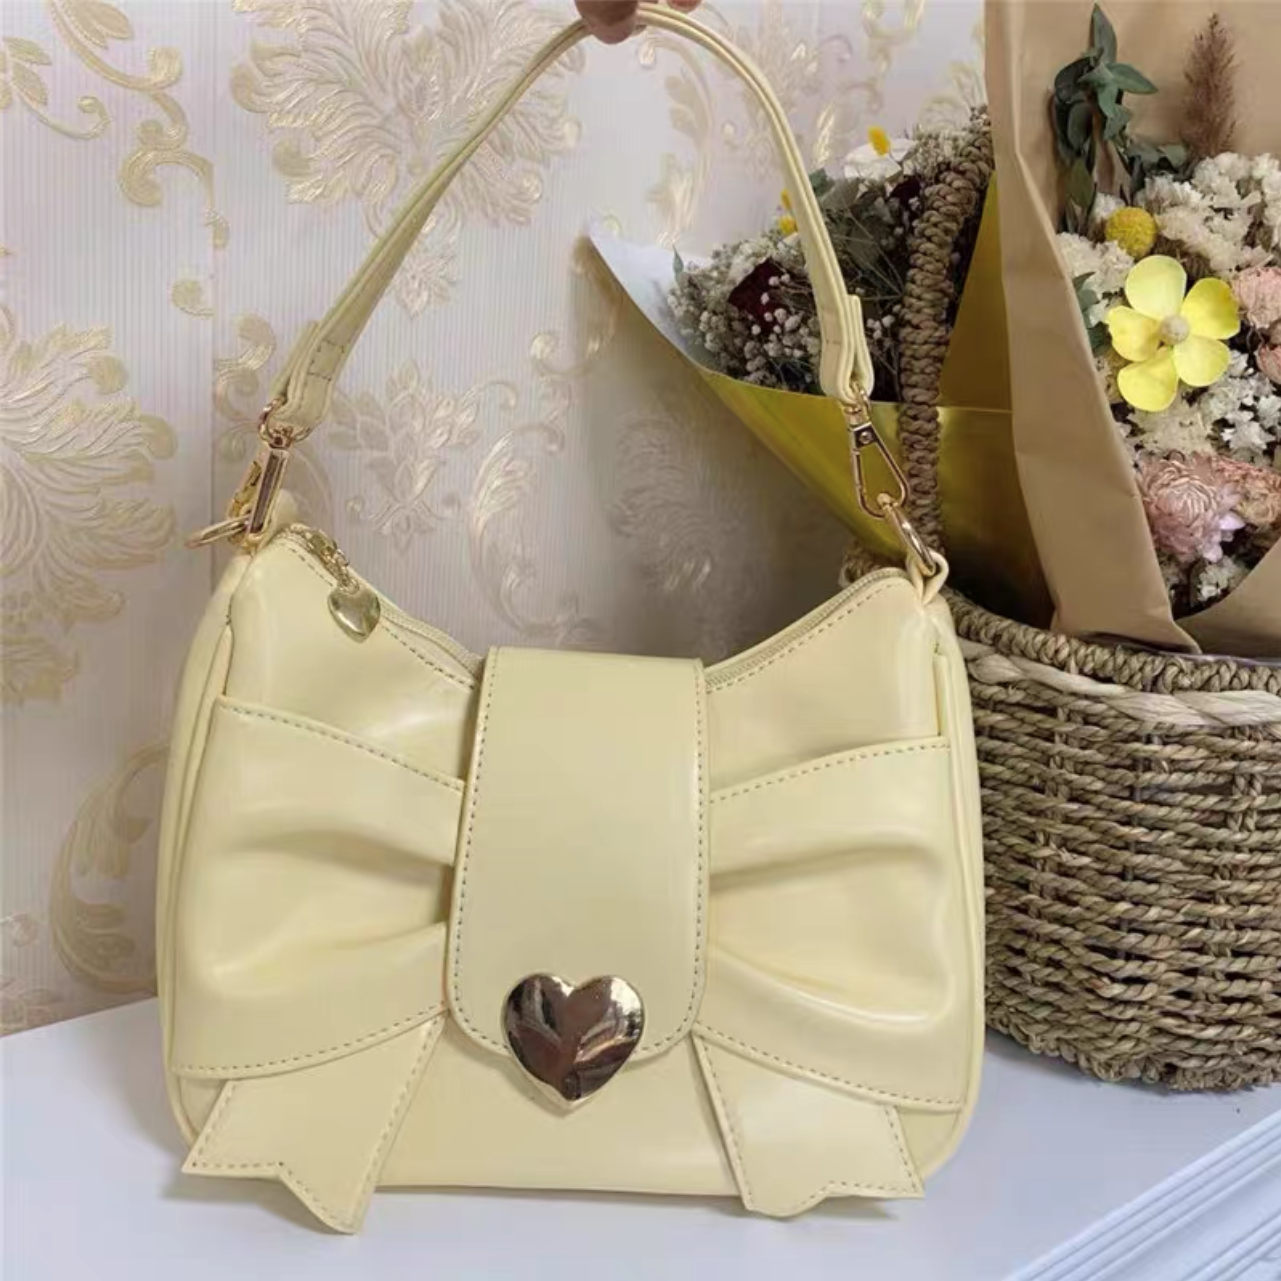 Bow Knot Shoulder Bag By Seraphim